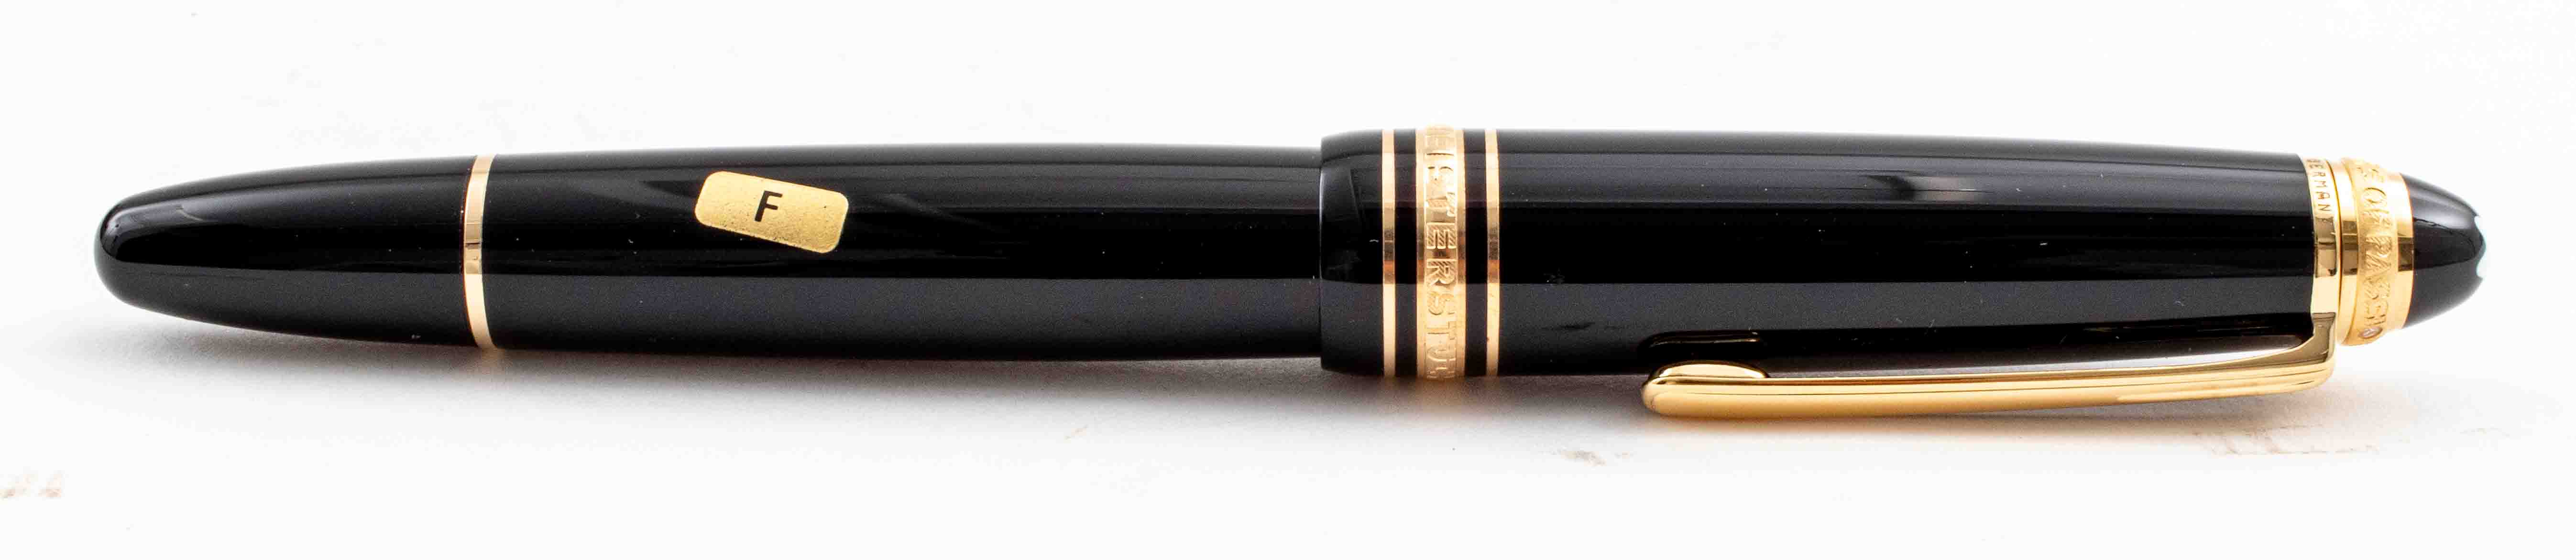 MONTBLANC SPECIAL ANNIVERSARY EDITION